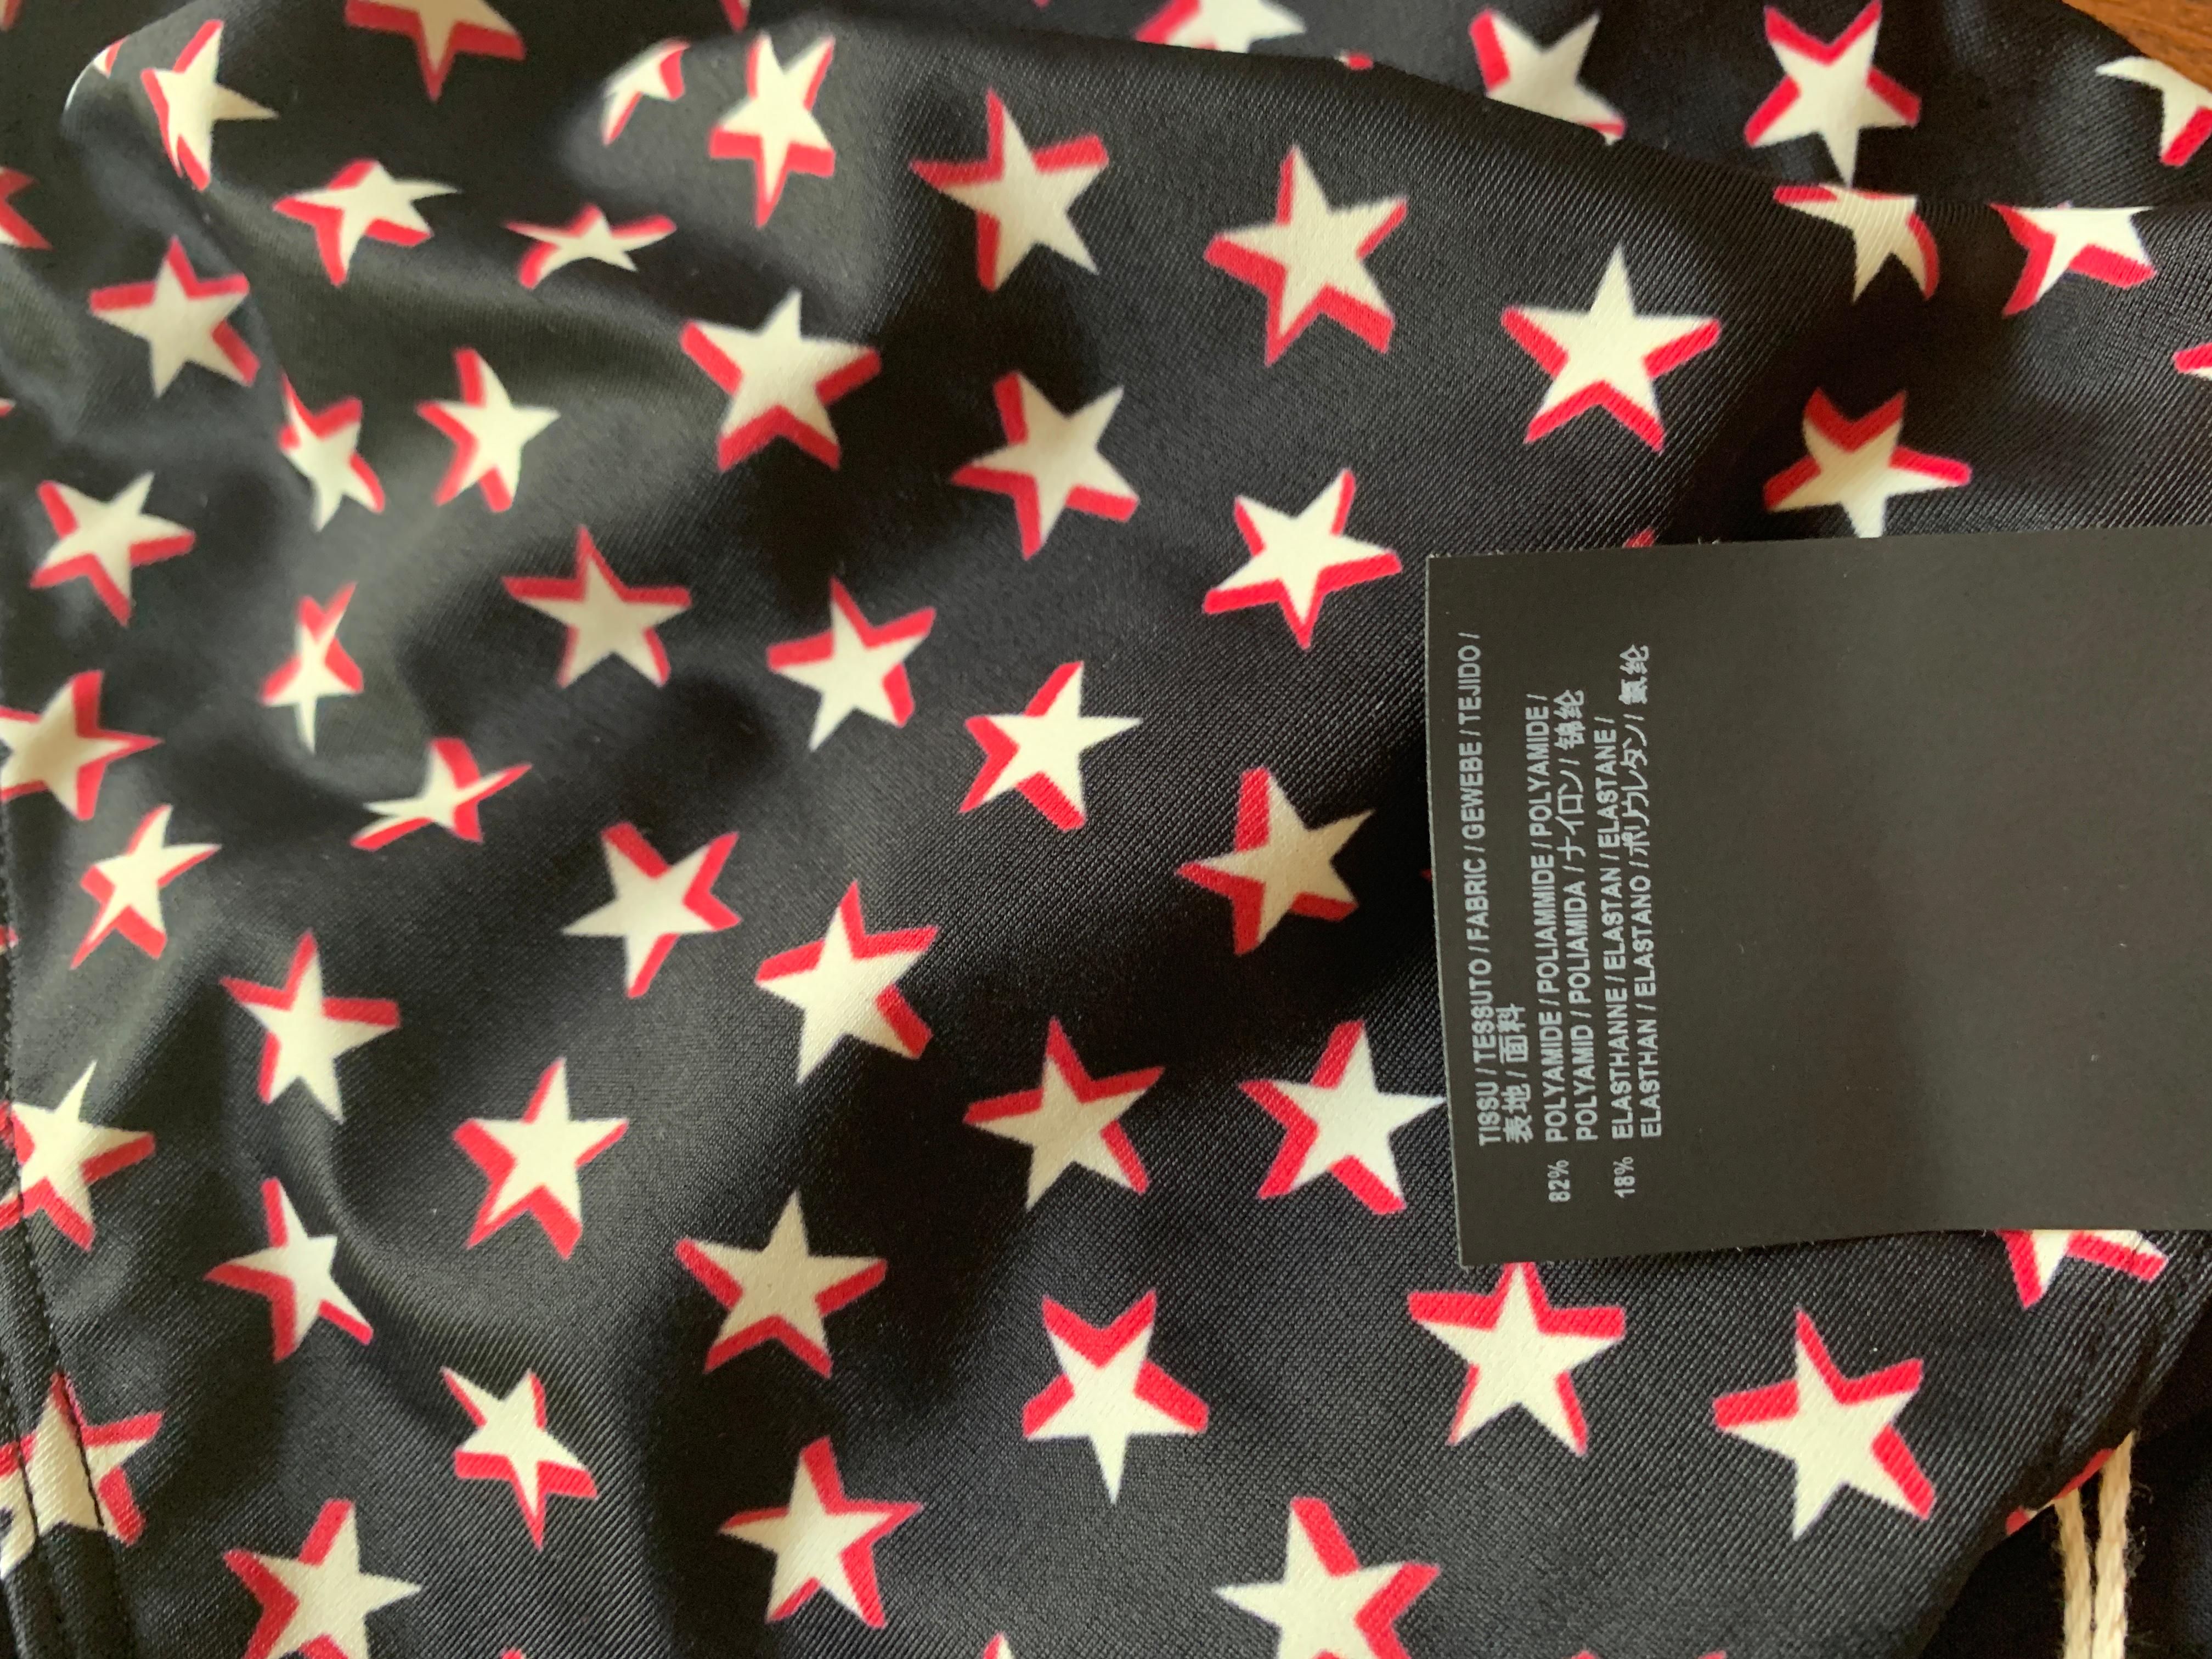 Saint Laurent Star Print Deep V Neck One Piece Halter Swimsuit Black White Red In New Condition For Sale In San Francisco, CA